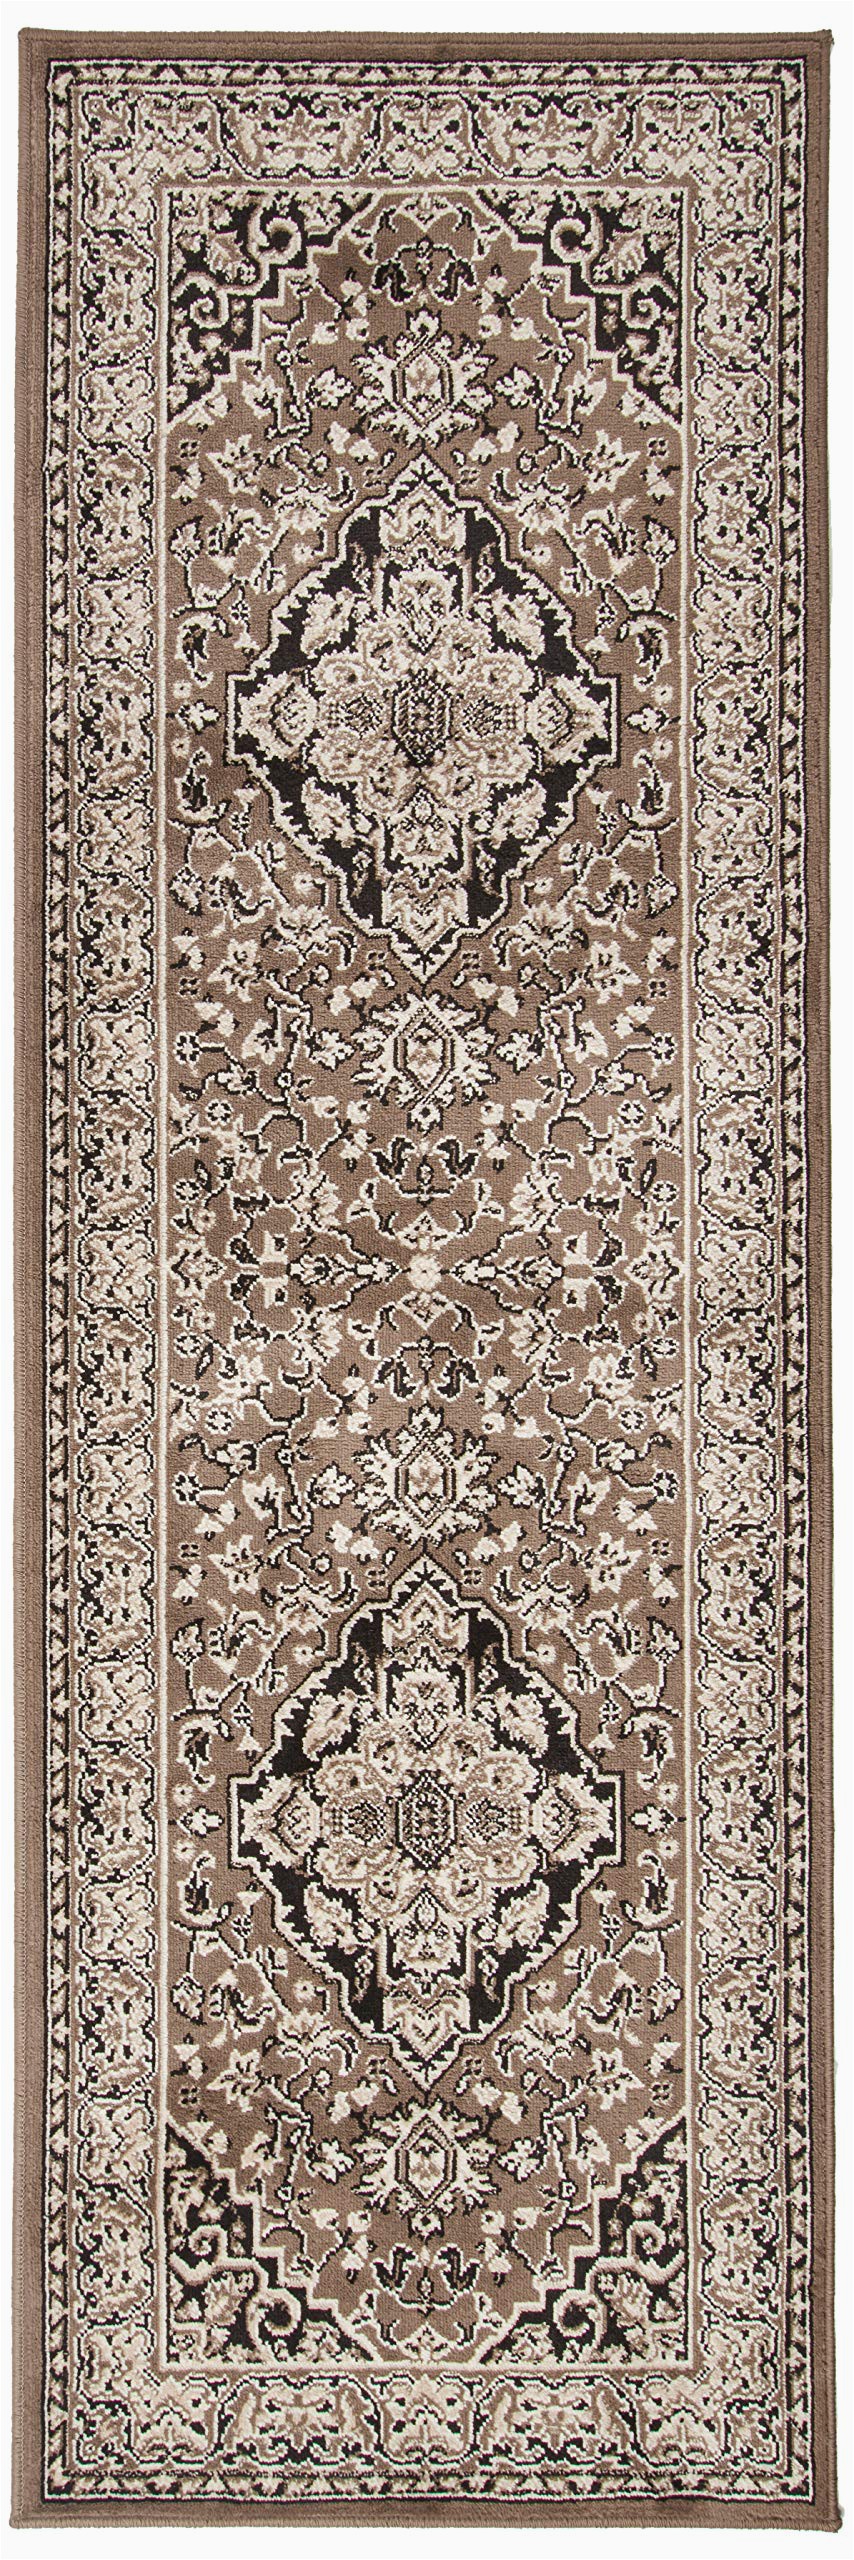 Area Rugs with Waterproof Backing Superior Elegant Glendale Collection area Rug 8mm Pile